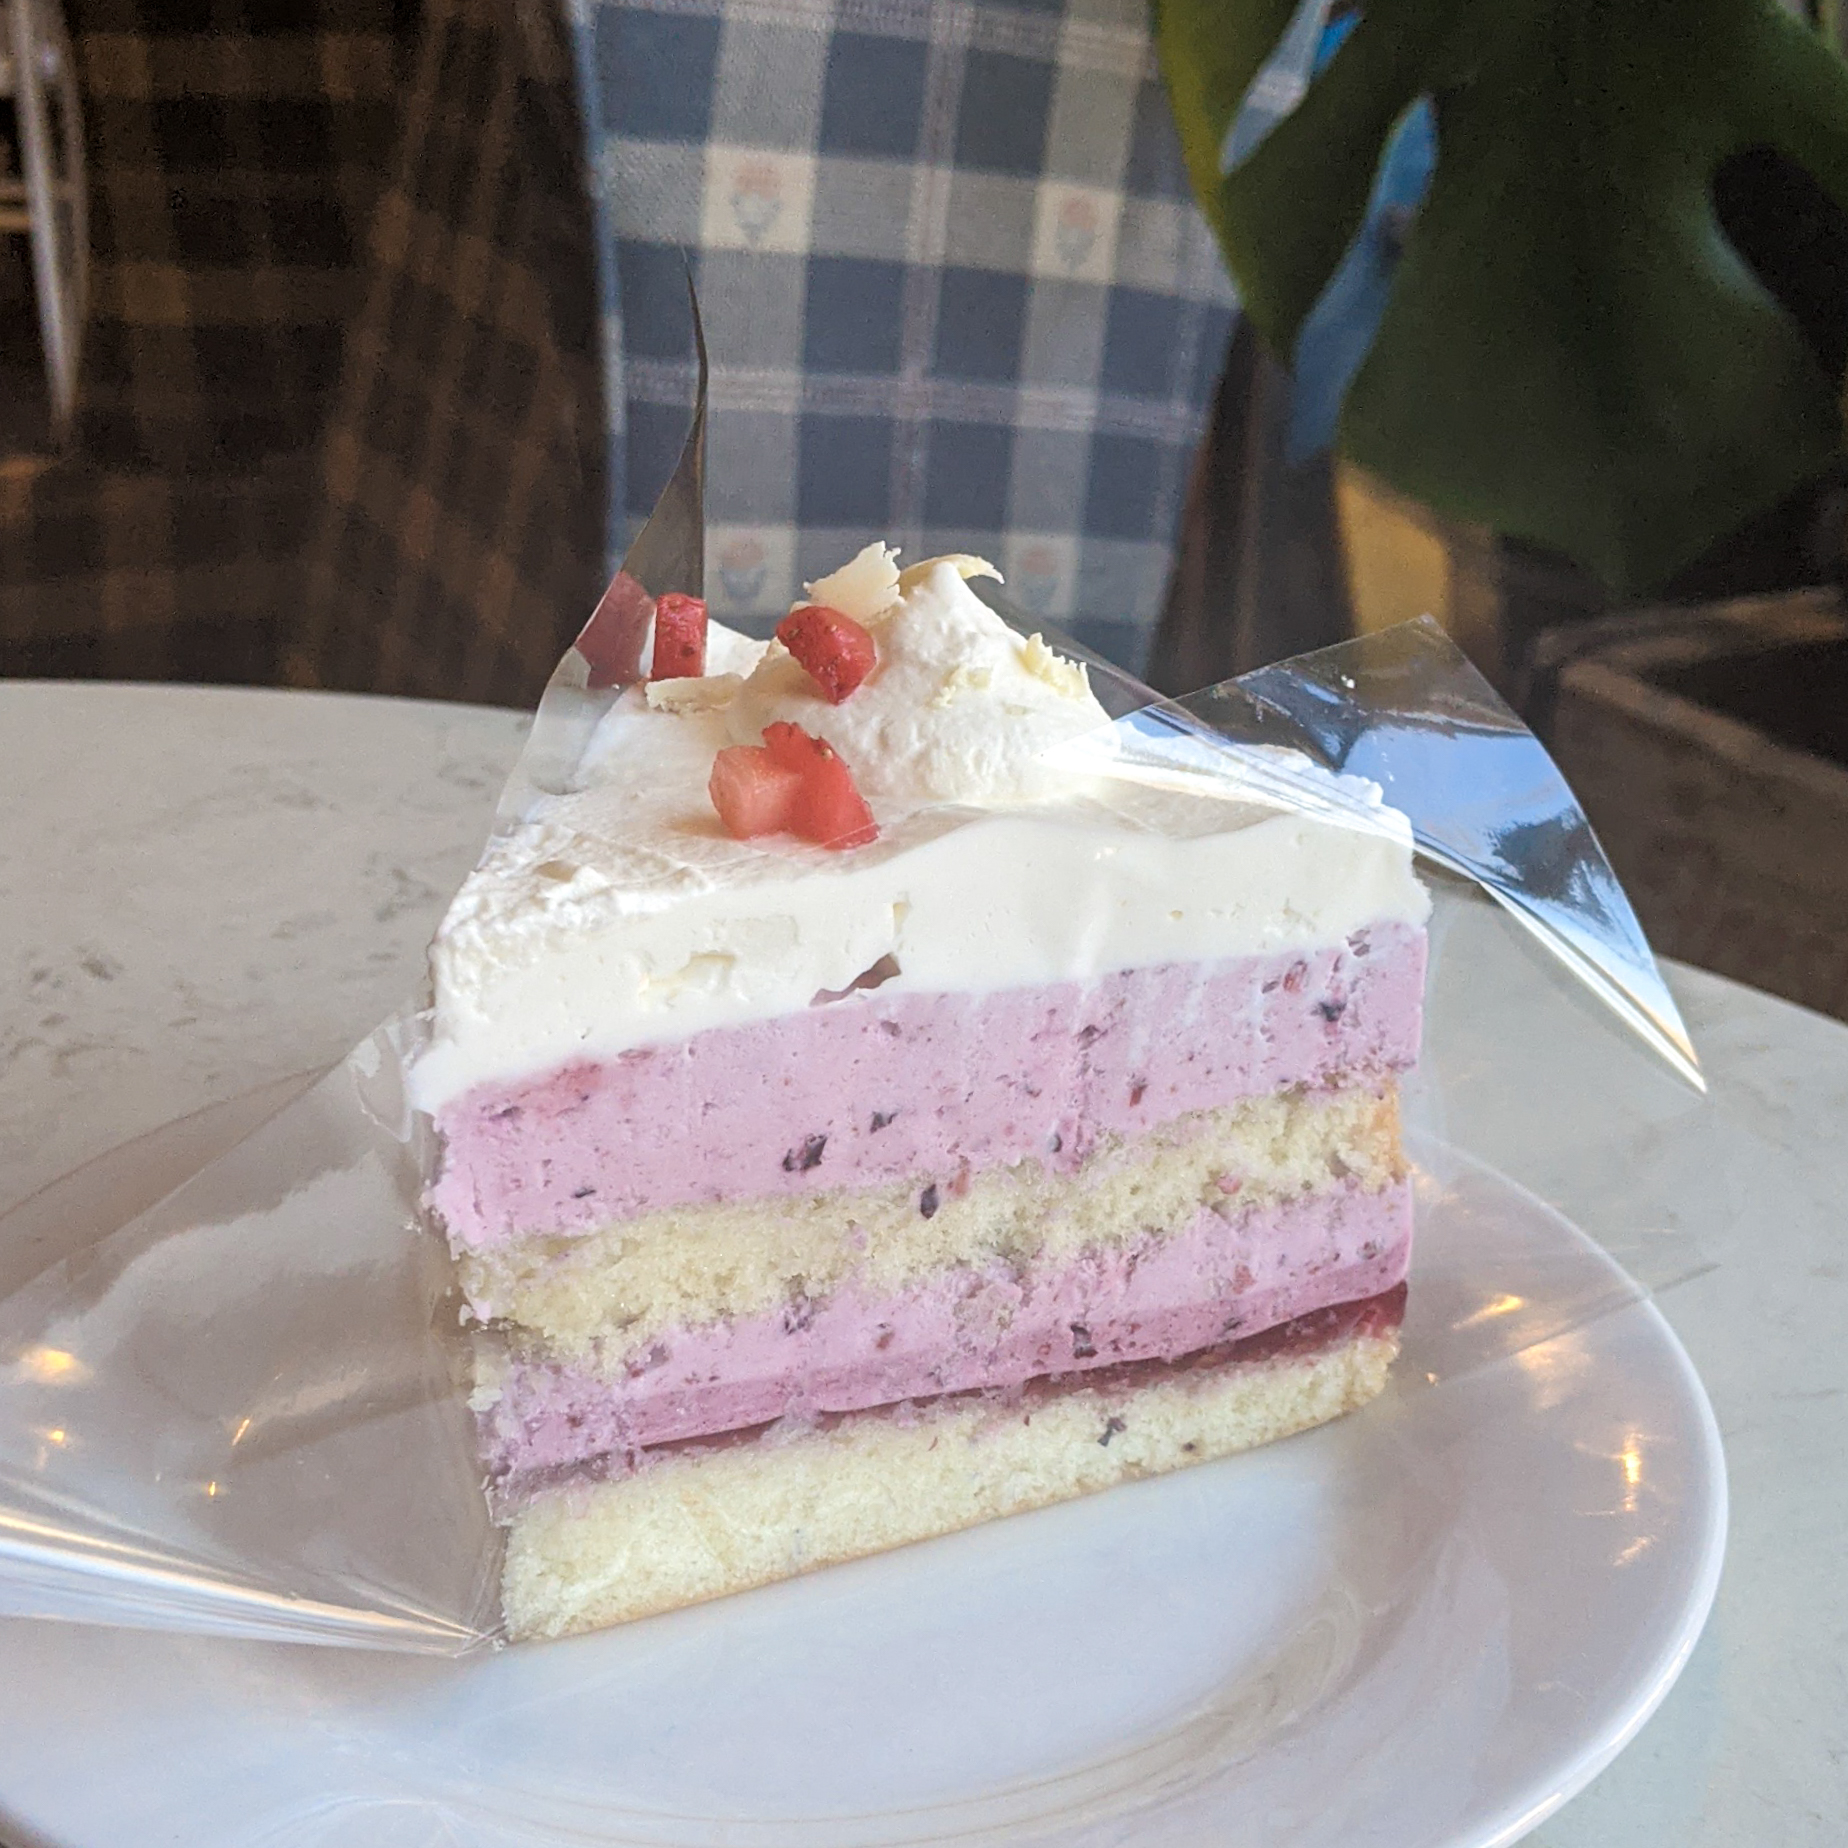 A homemade strawberry cake from Caffe Paradiso on a clear small plate. Photo provided by Caffe Paradiso.